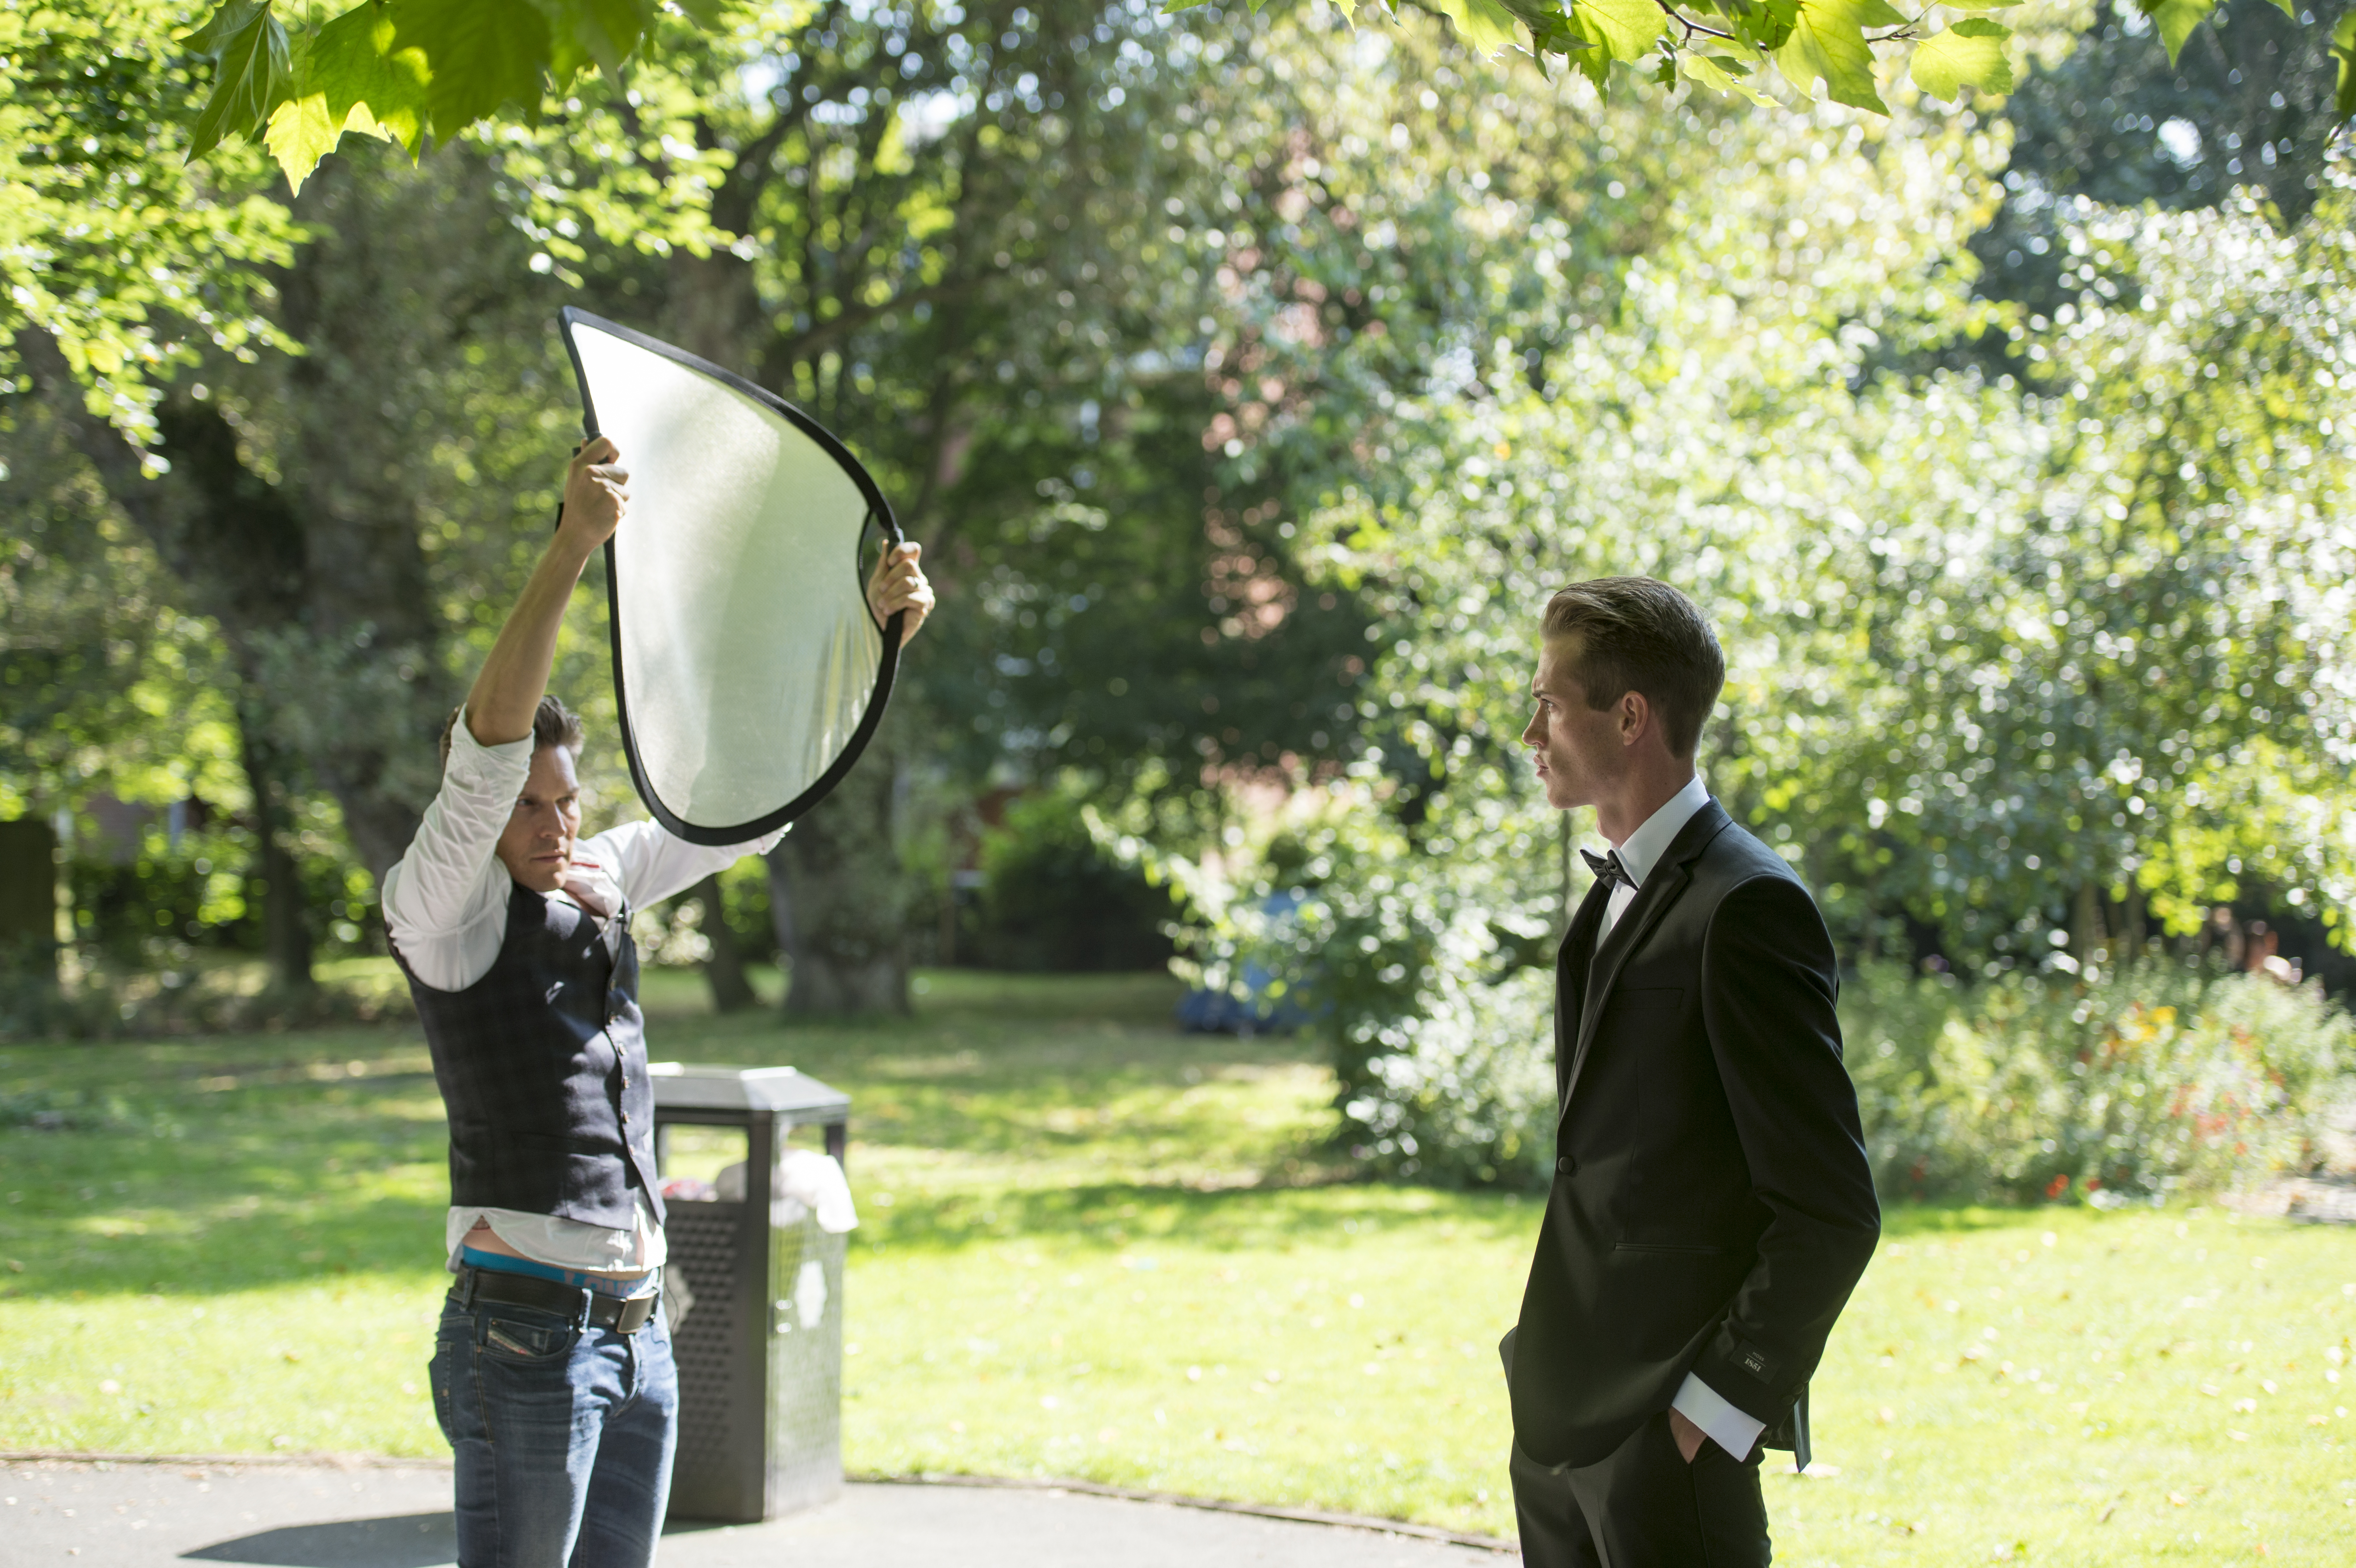 Did you know that a reflector can do this?